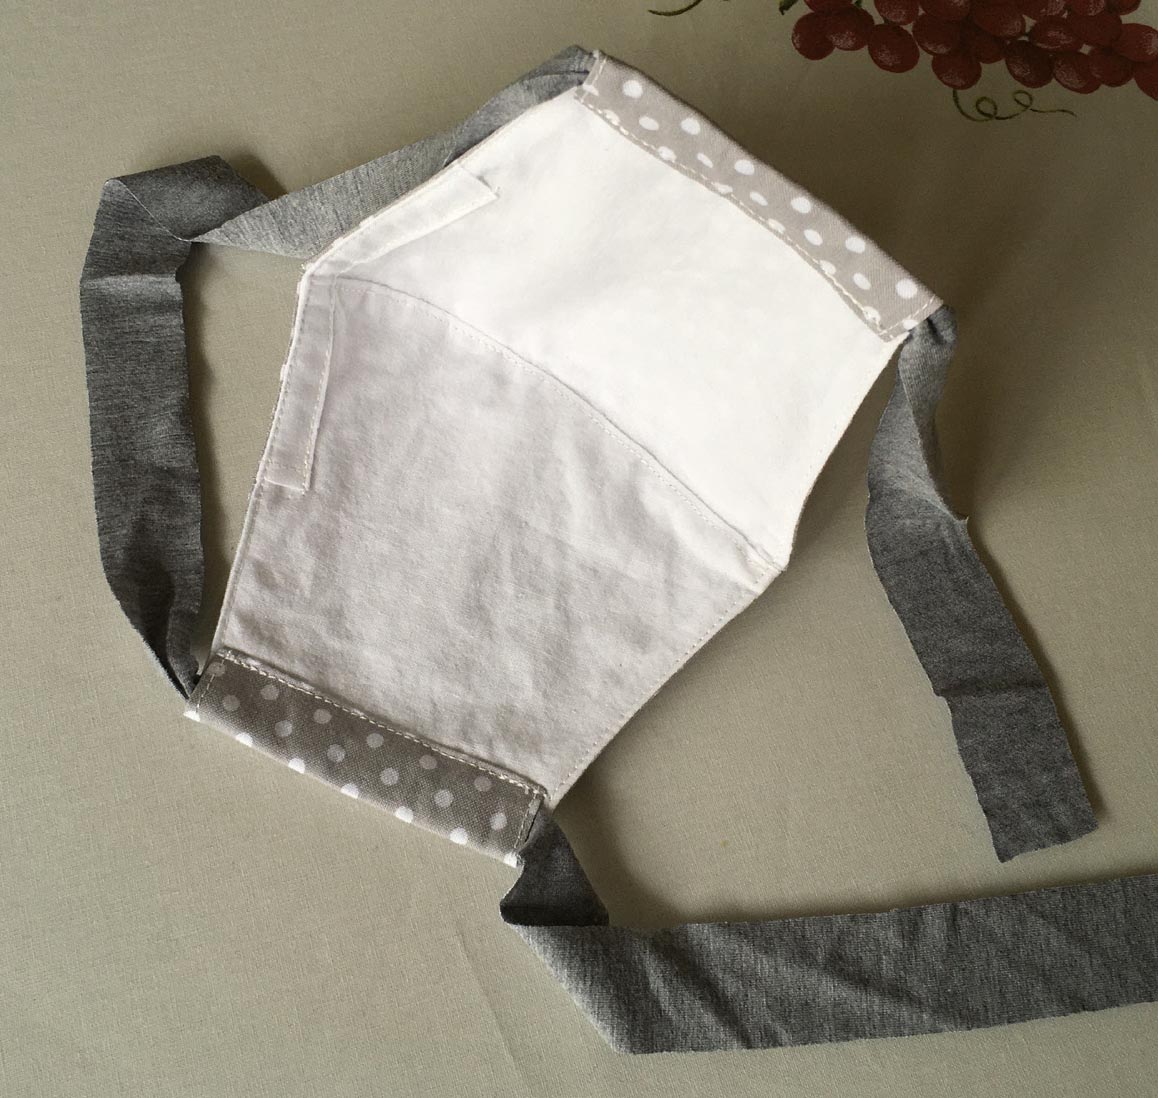 The interior of the fabric face mask is white, with a sewn pocket at the top to hold a bendable nose wire.